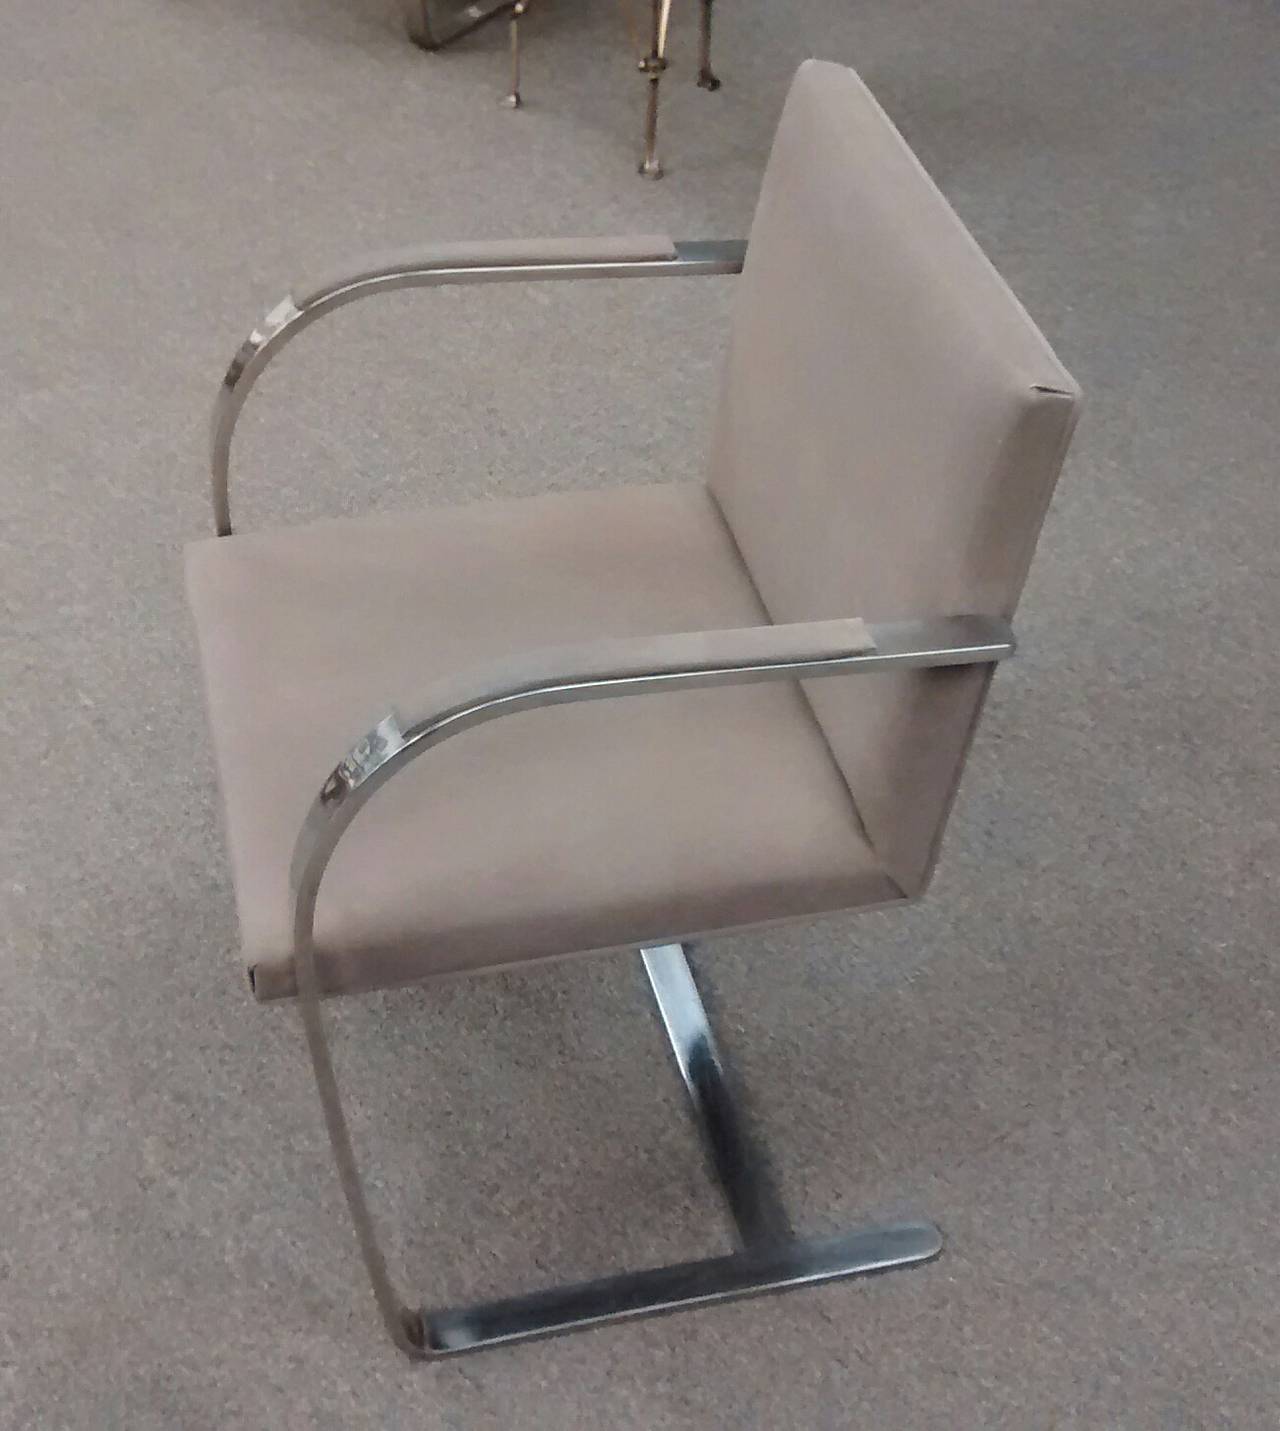 Recent estate find is this pair of Mies van der Rohe designed Brno armchairs, dating to the early 1960s. 

Retrieved from their original location at Lafayette Towers in Detroit, a Mies designed pair of high rises. 

Covered in their original